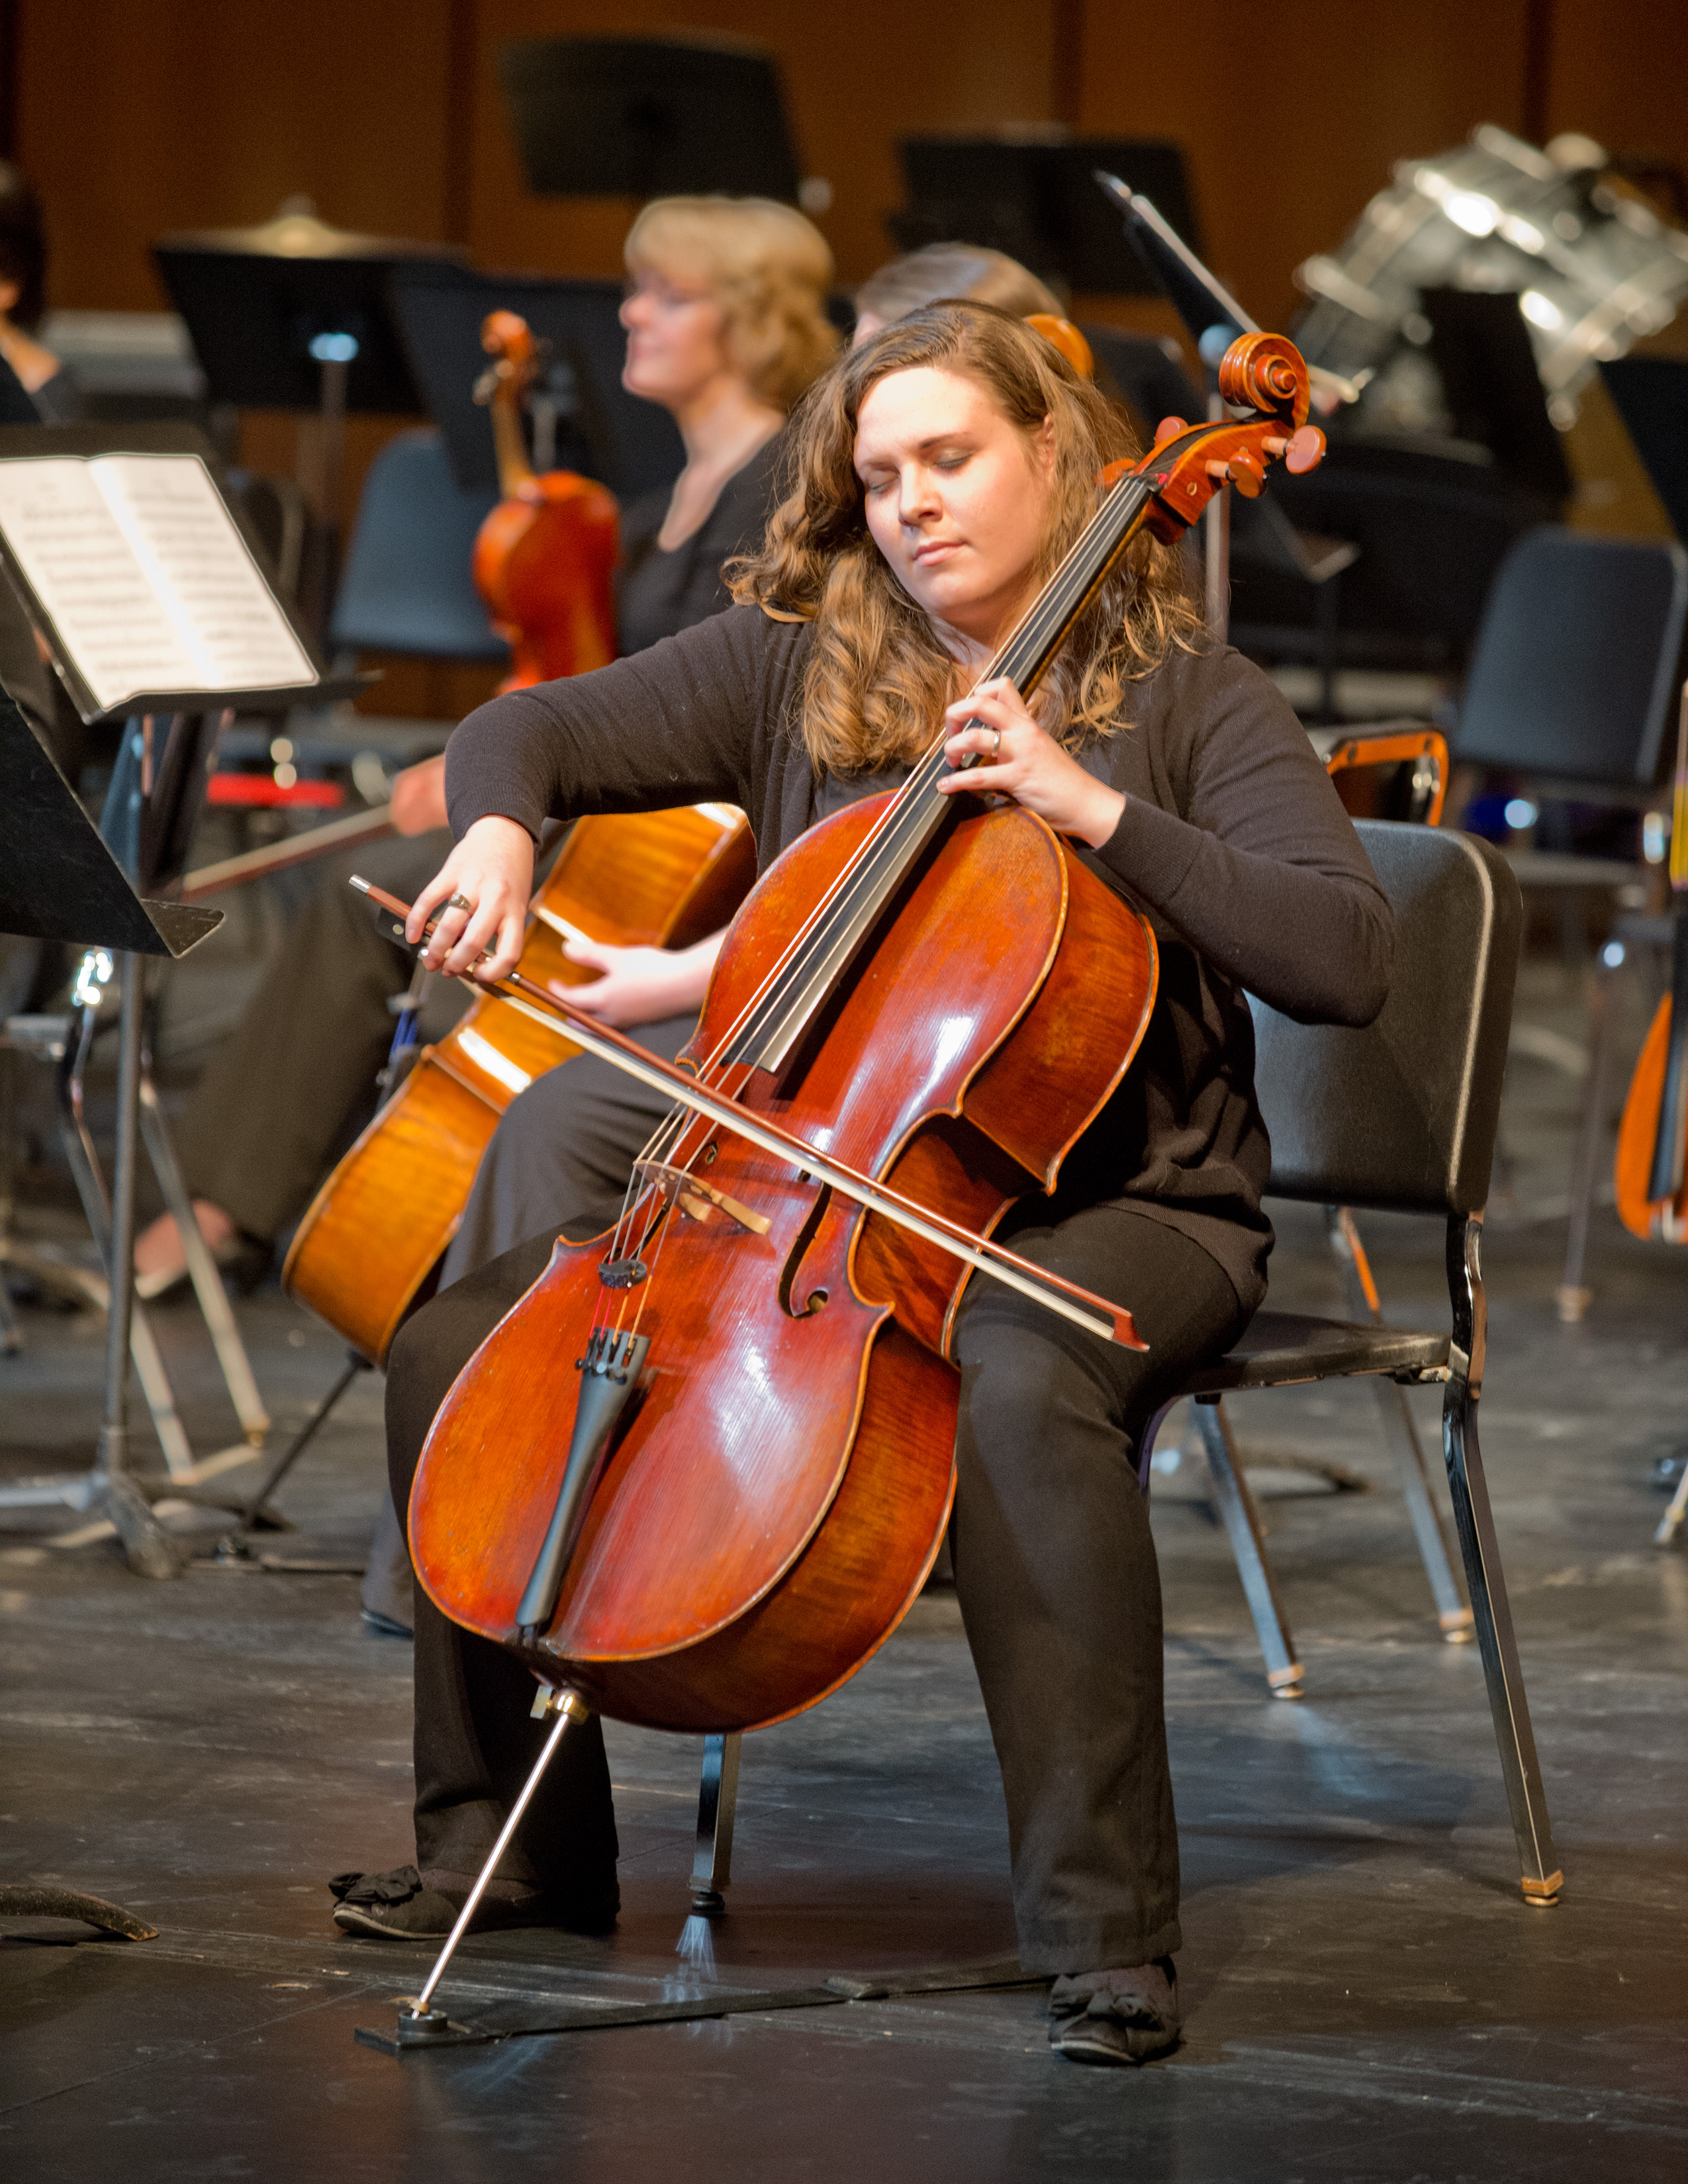 Student playing cello